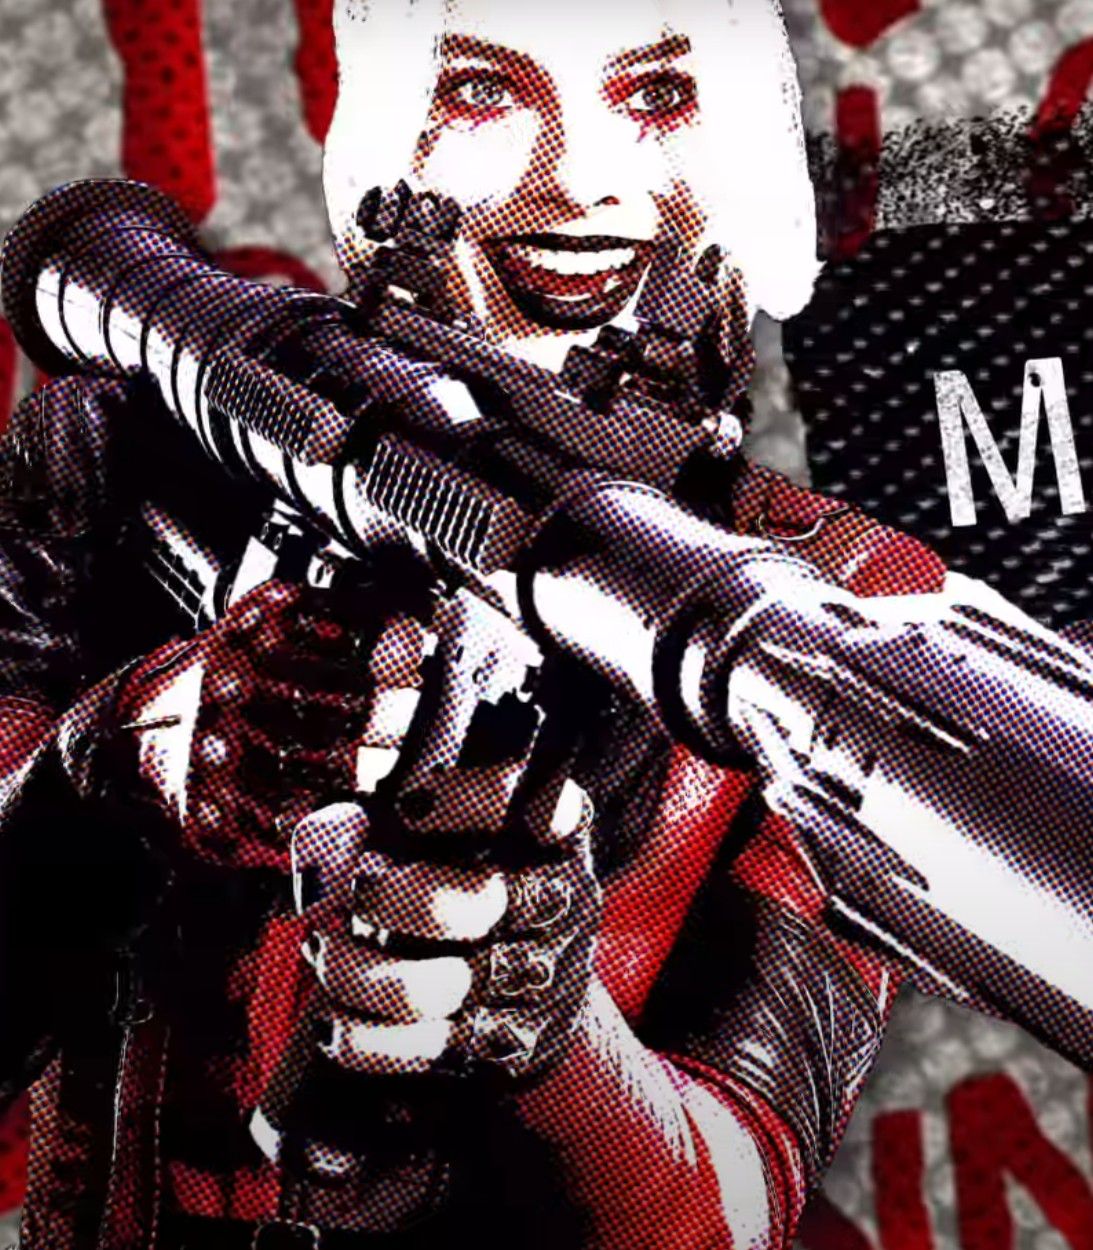 Suicide Squad Roll Call Margot Robbie Harley Quinn Vertical (1)